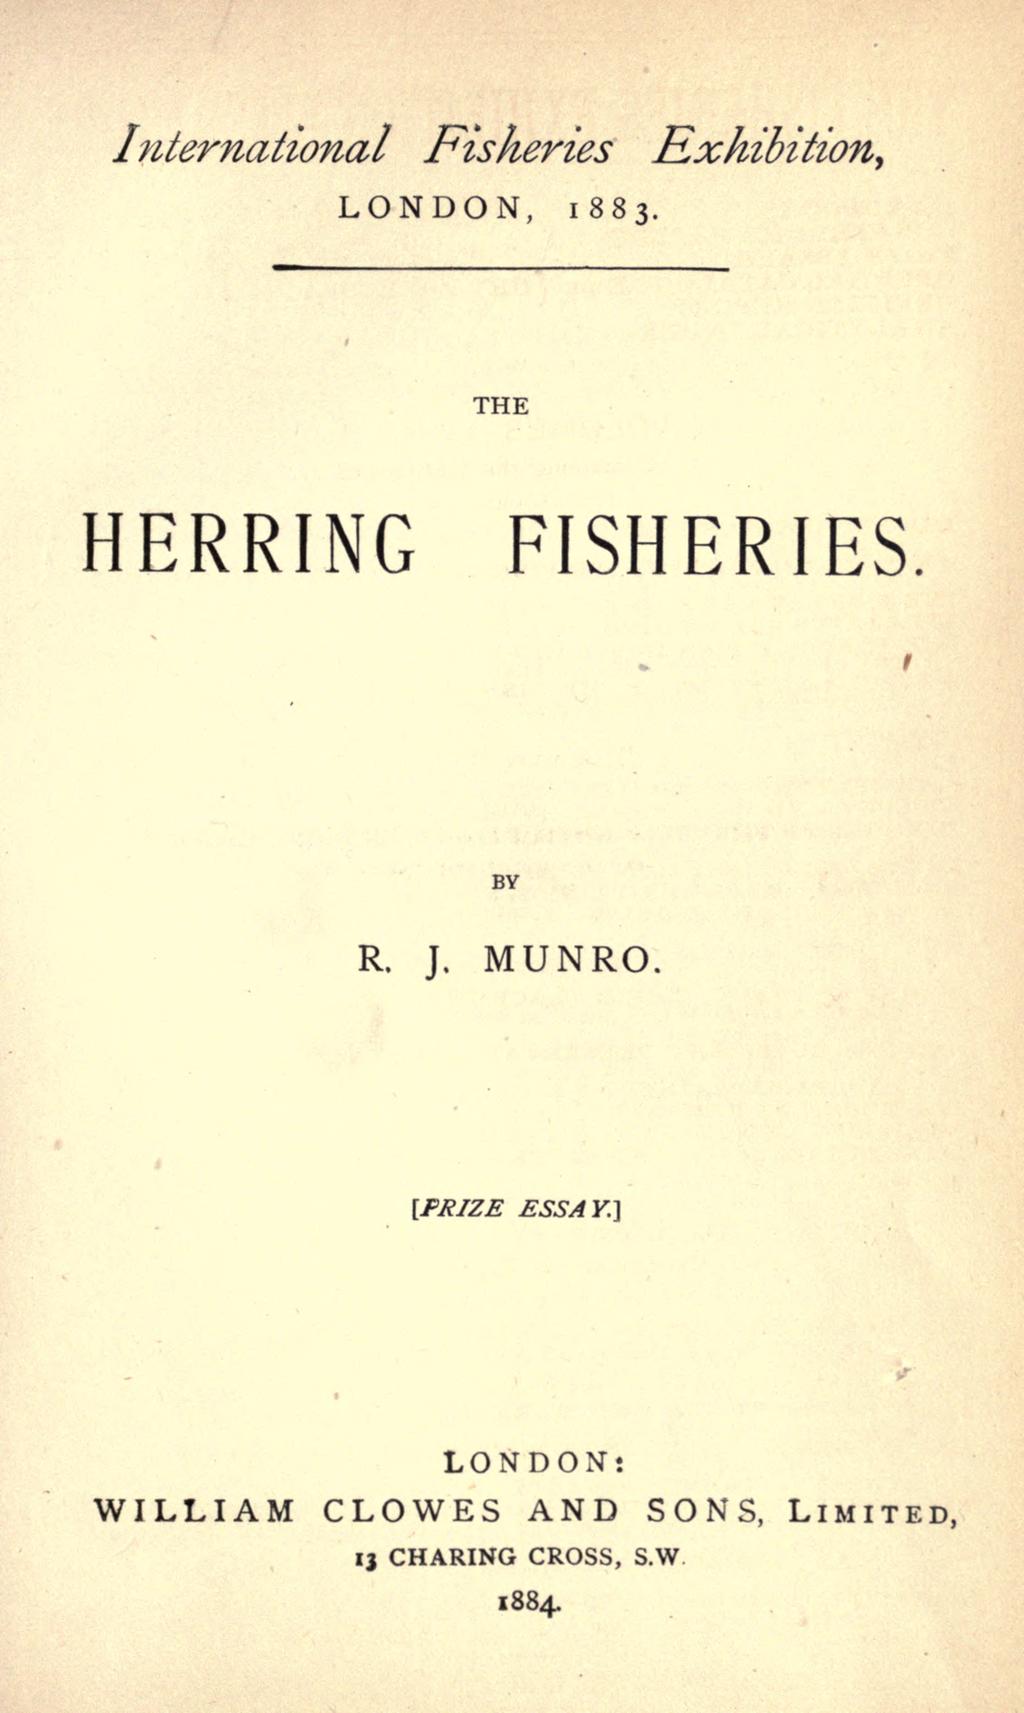 International Fisheries Exhibition, LONDON, 1883. THE HERRING FISHERIES BY R. J.